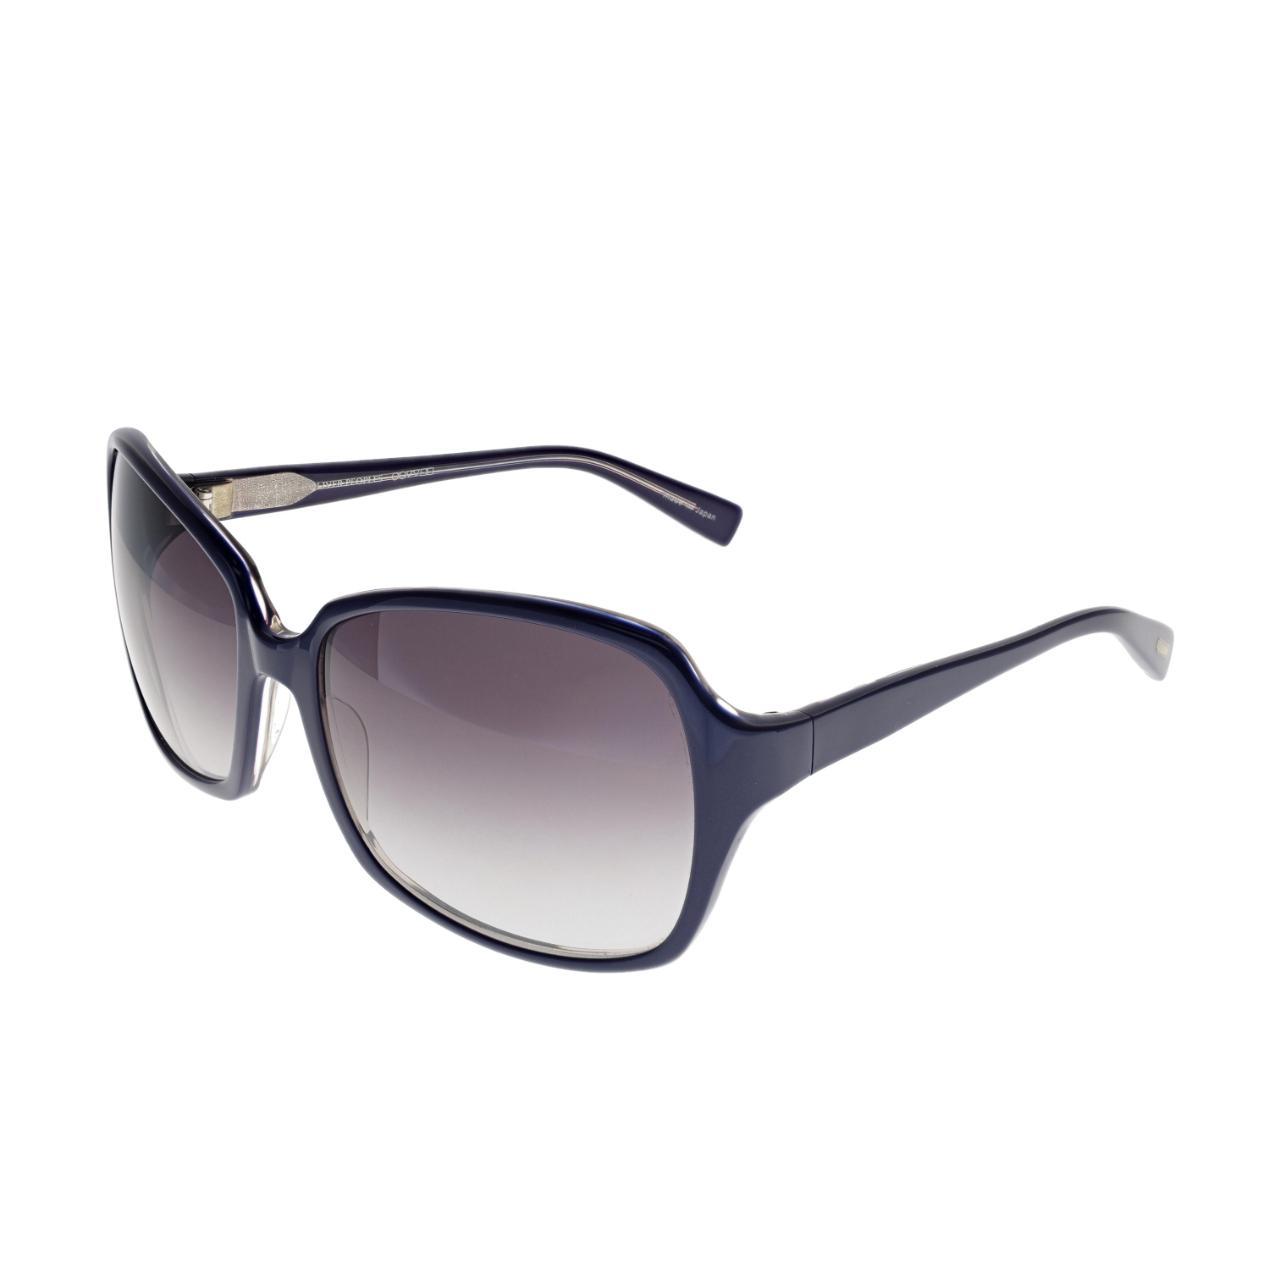 Oliver Peoples Women's Blue and Grey Sunglasses